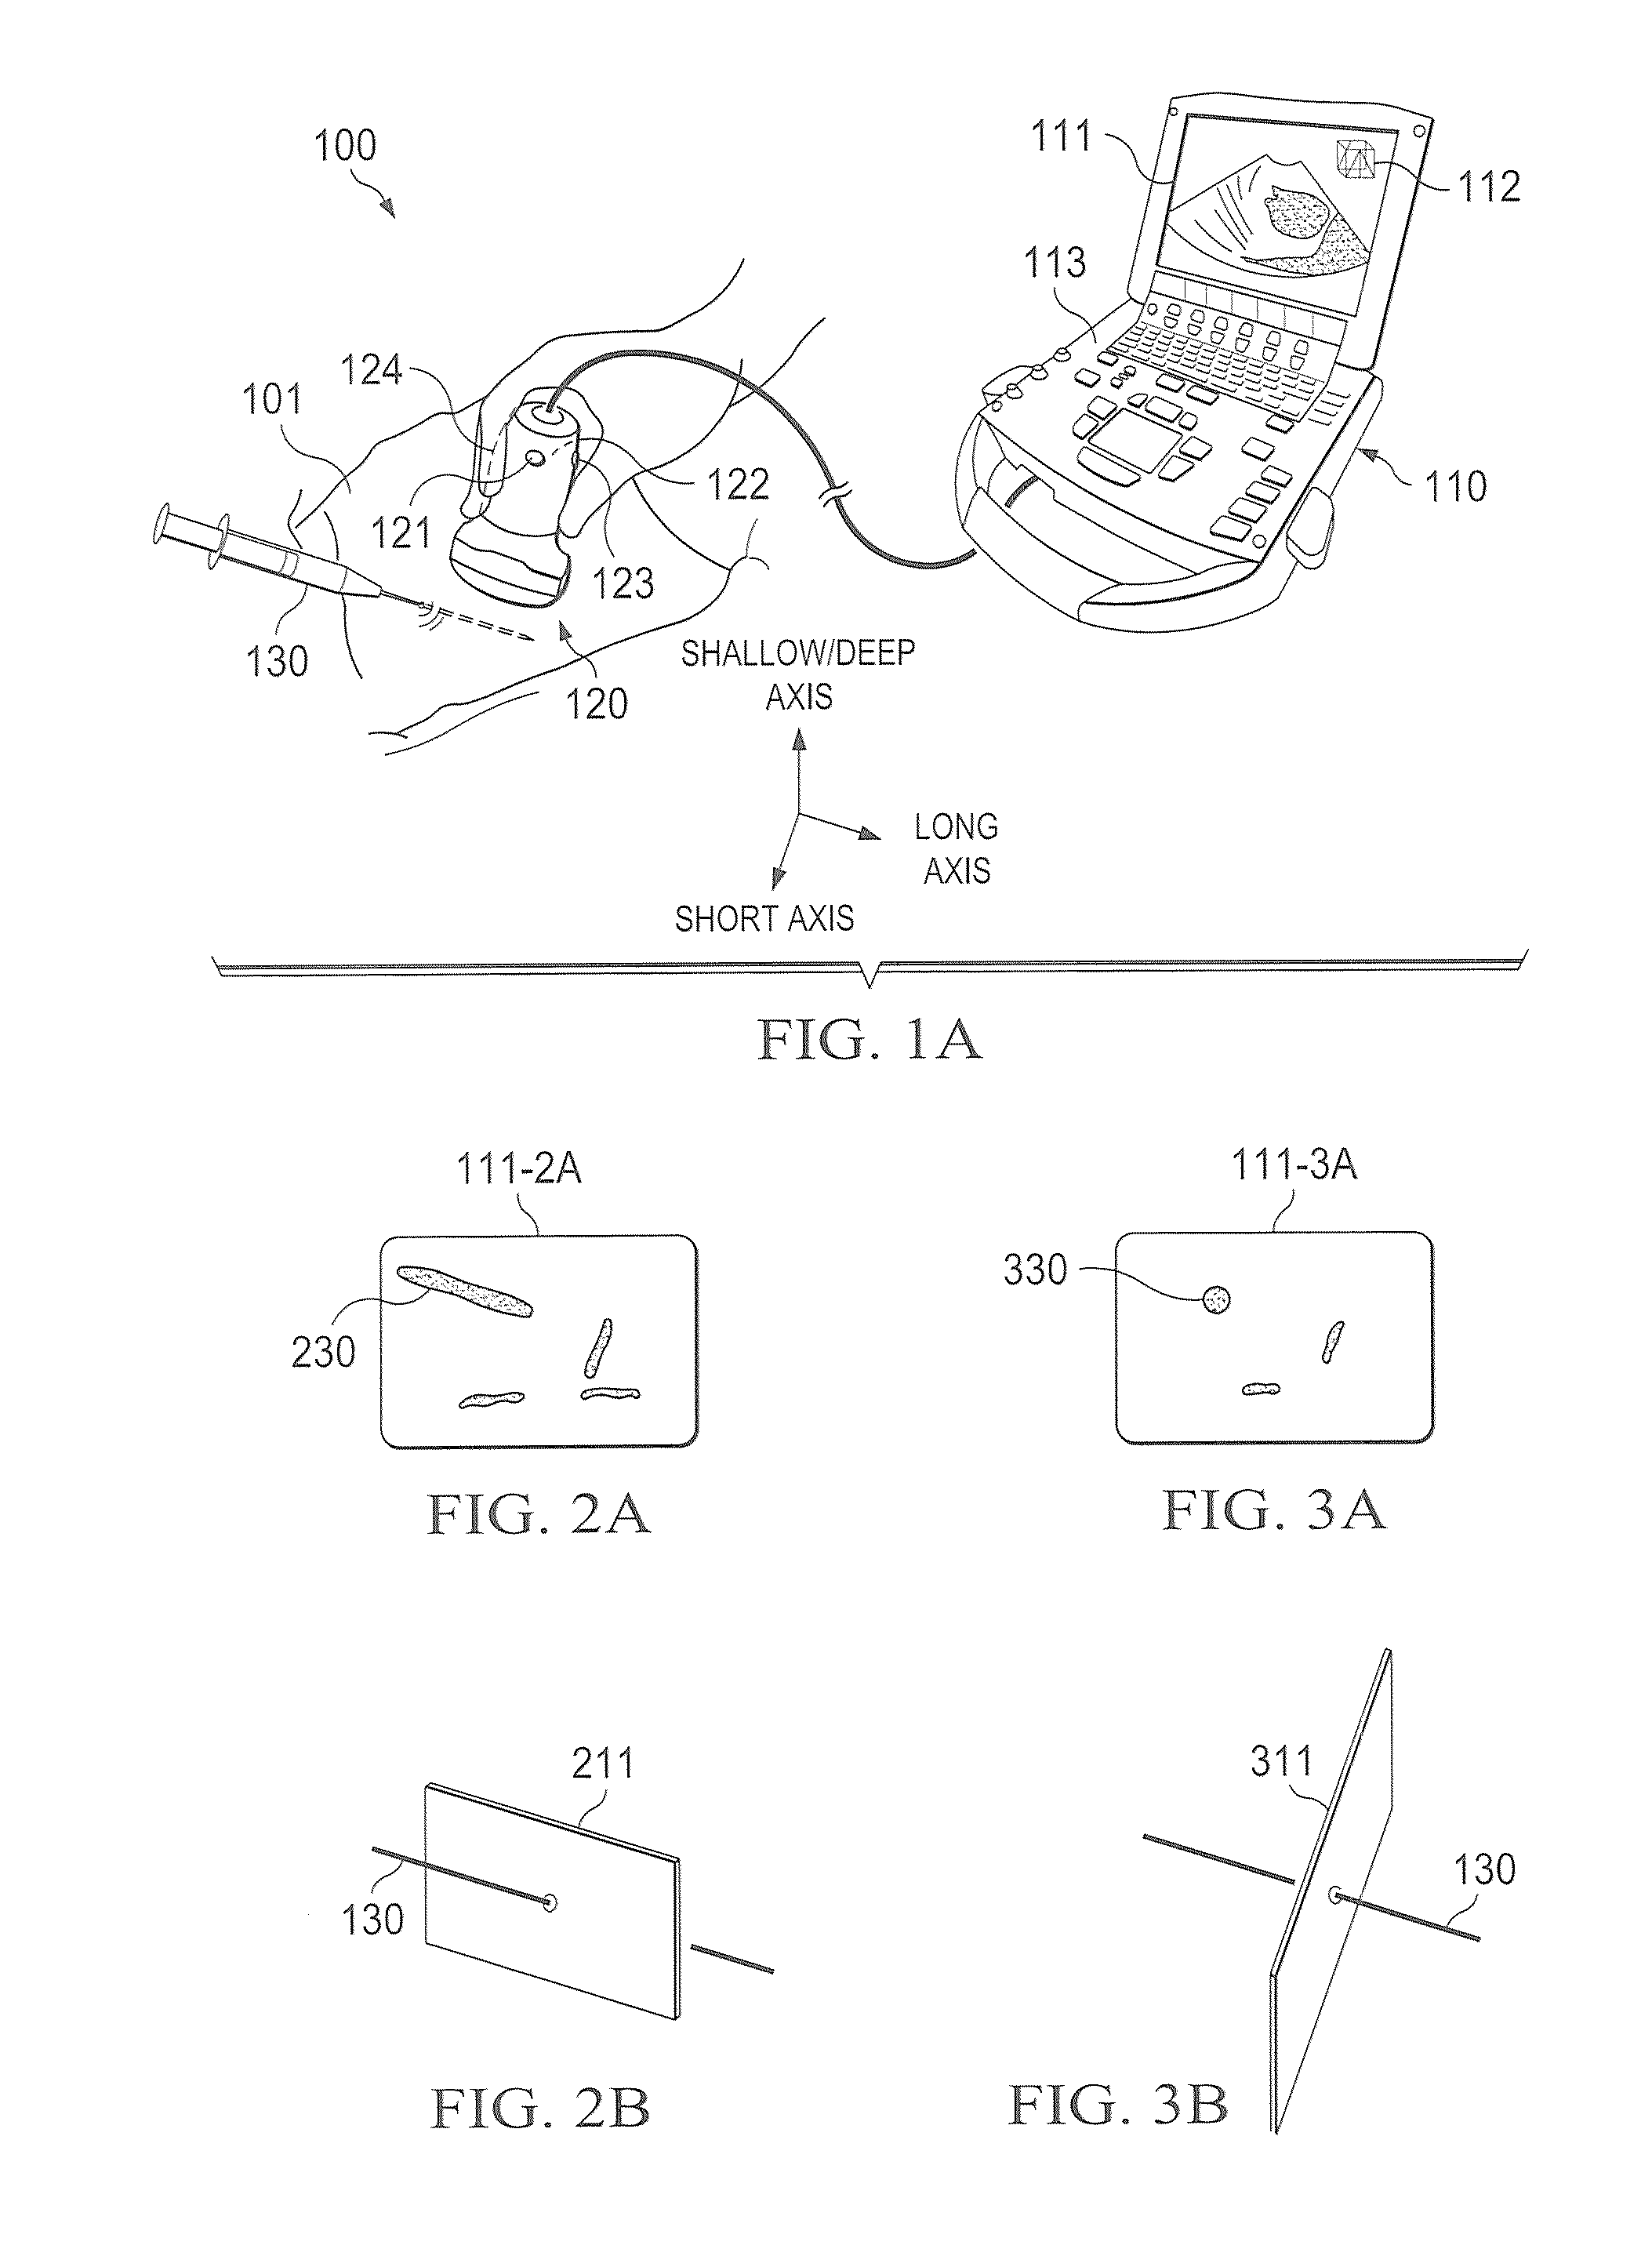 Systems and methods for image presentation for medical examination and interventional procedures